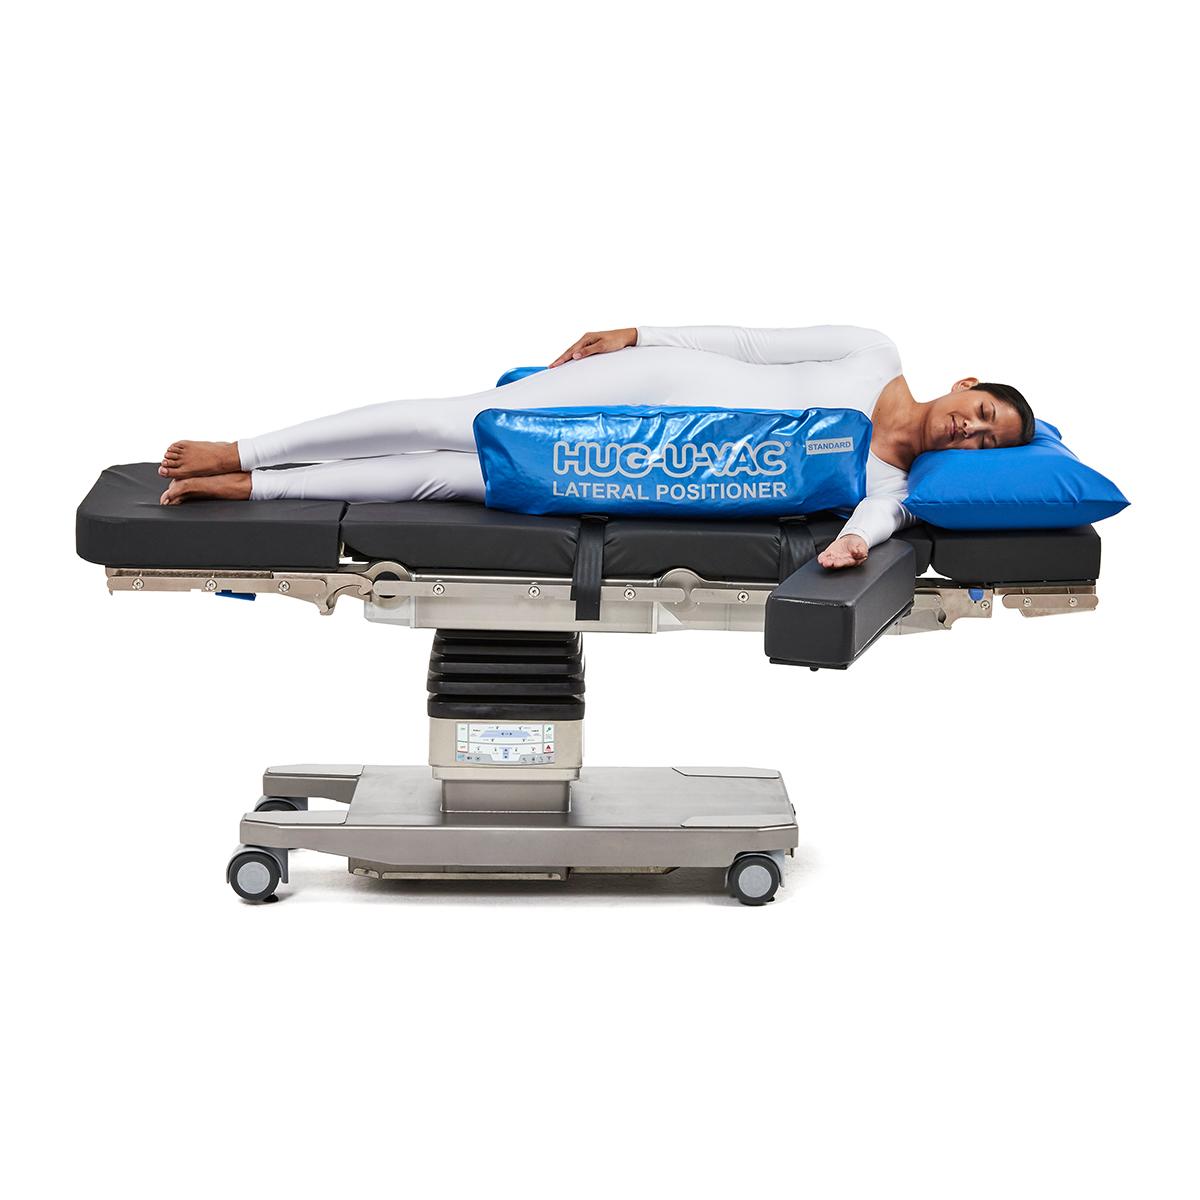 Hillrom surgical table equipped with Lateral Hug-U-Vac accessories.